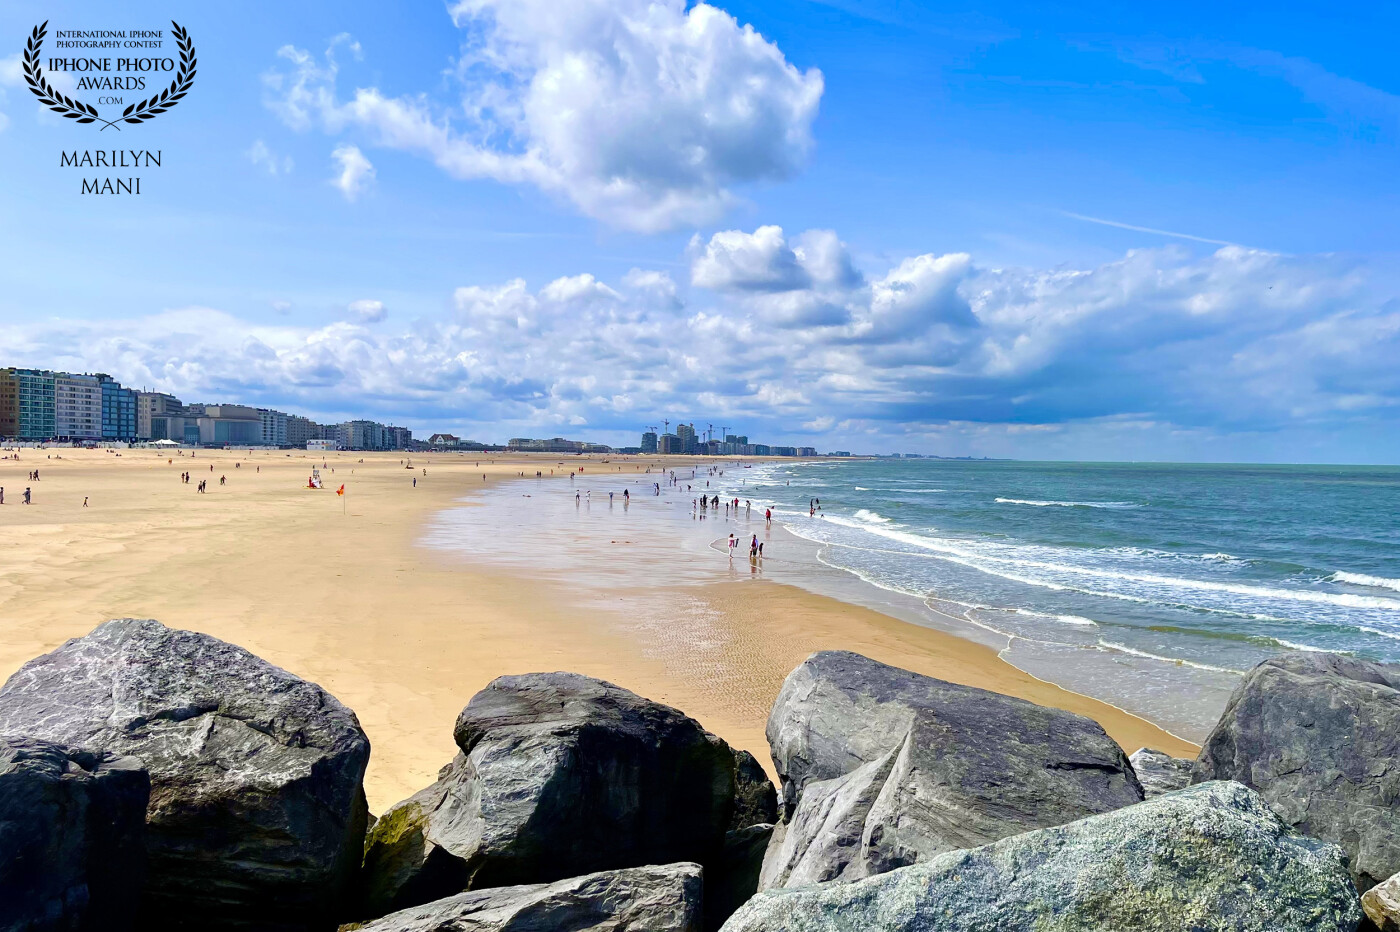 Oostende beach in Belgium - one of the largest beaches I’ve been to. The calmness the water brings is amazing and is proof of the diverse experiences Belgium has to offer. Each part of this town is so gorgeous and a photographer’s delight!